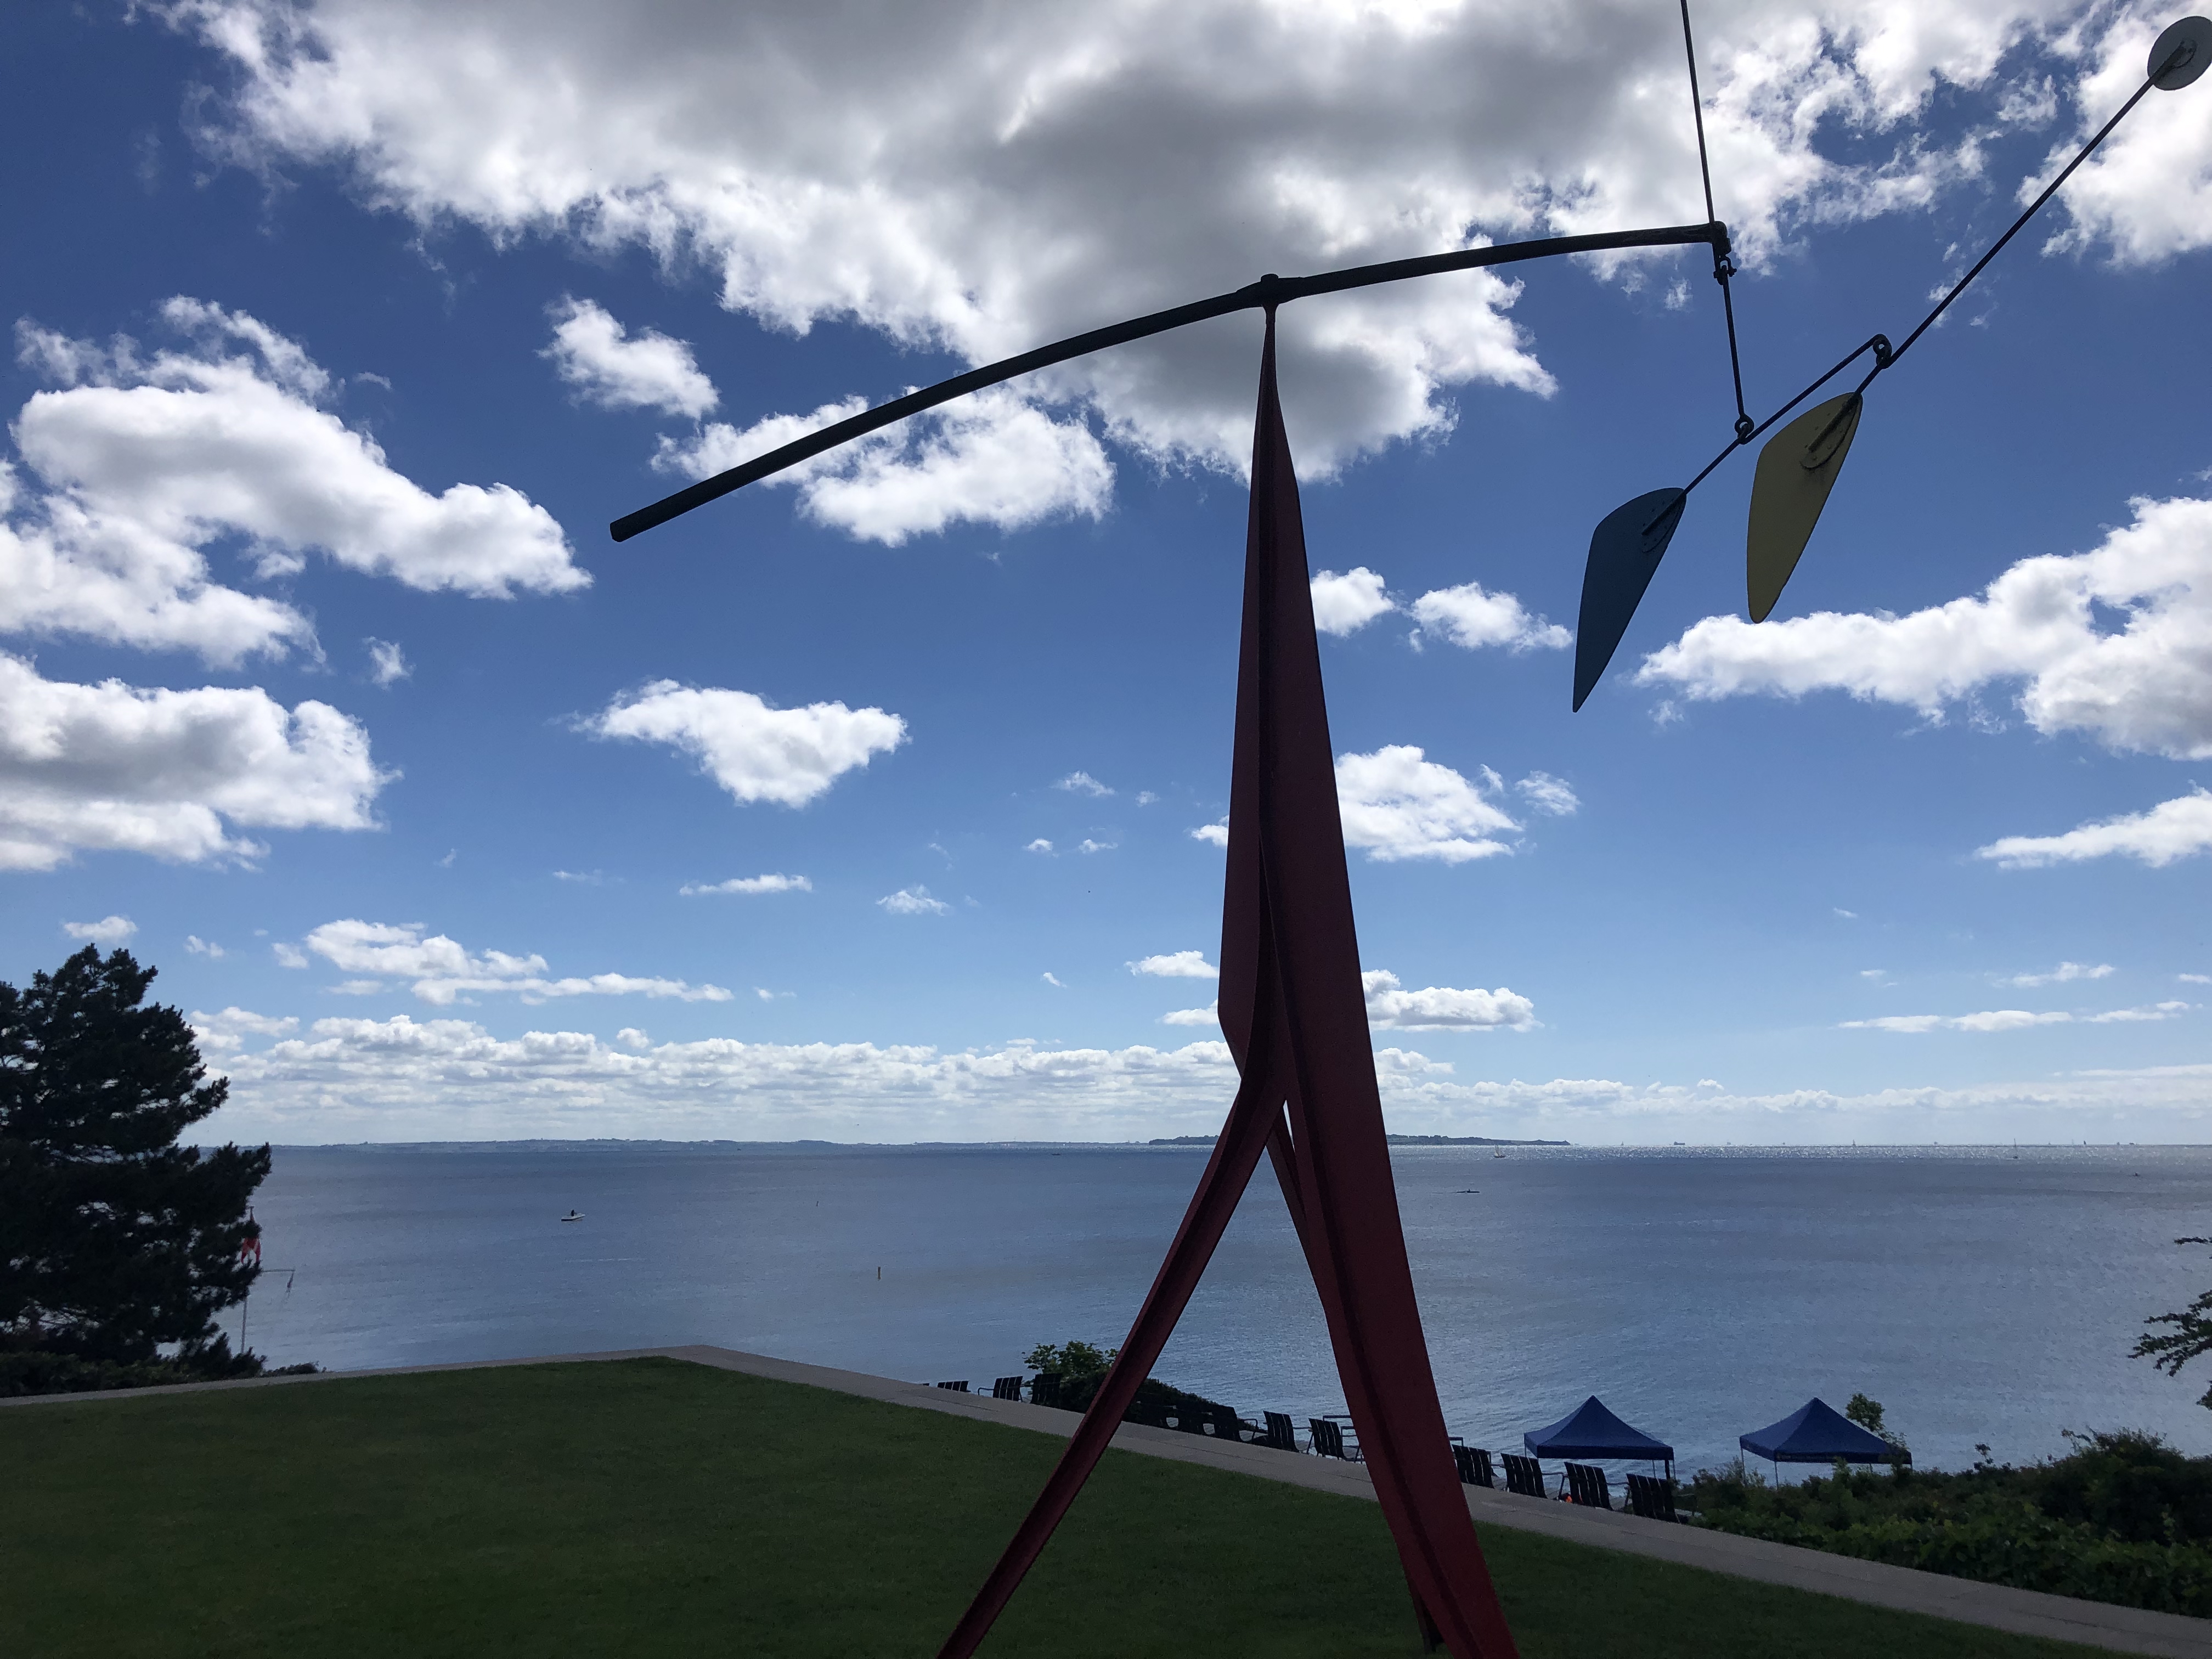 Alexander Calder mobile sculture in the Louisiana yard with the ocean and blue skies behind it.